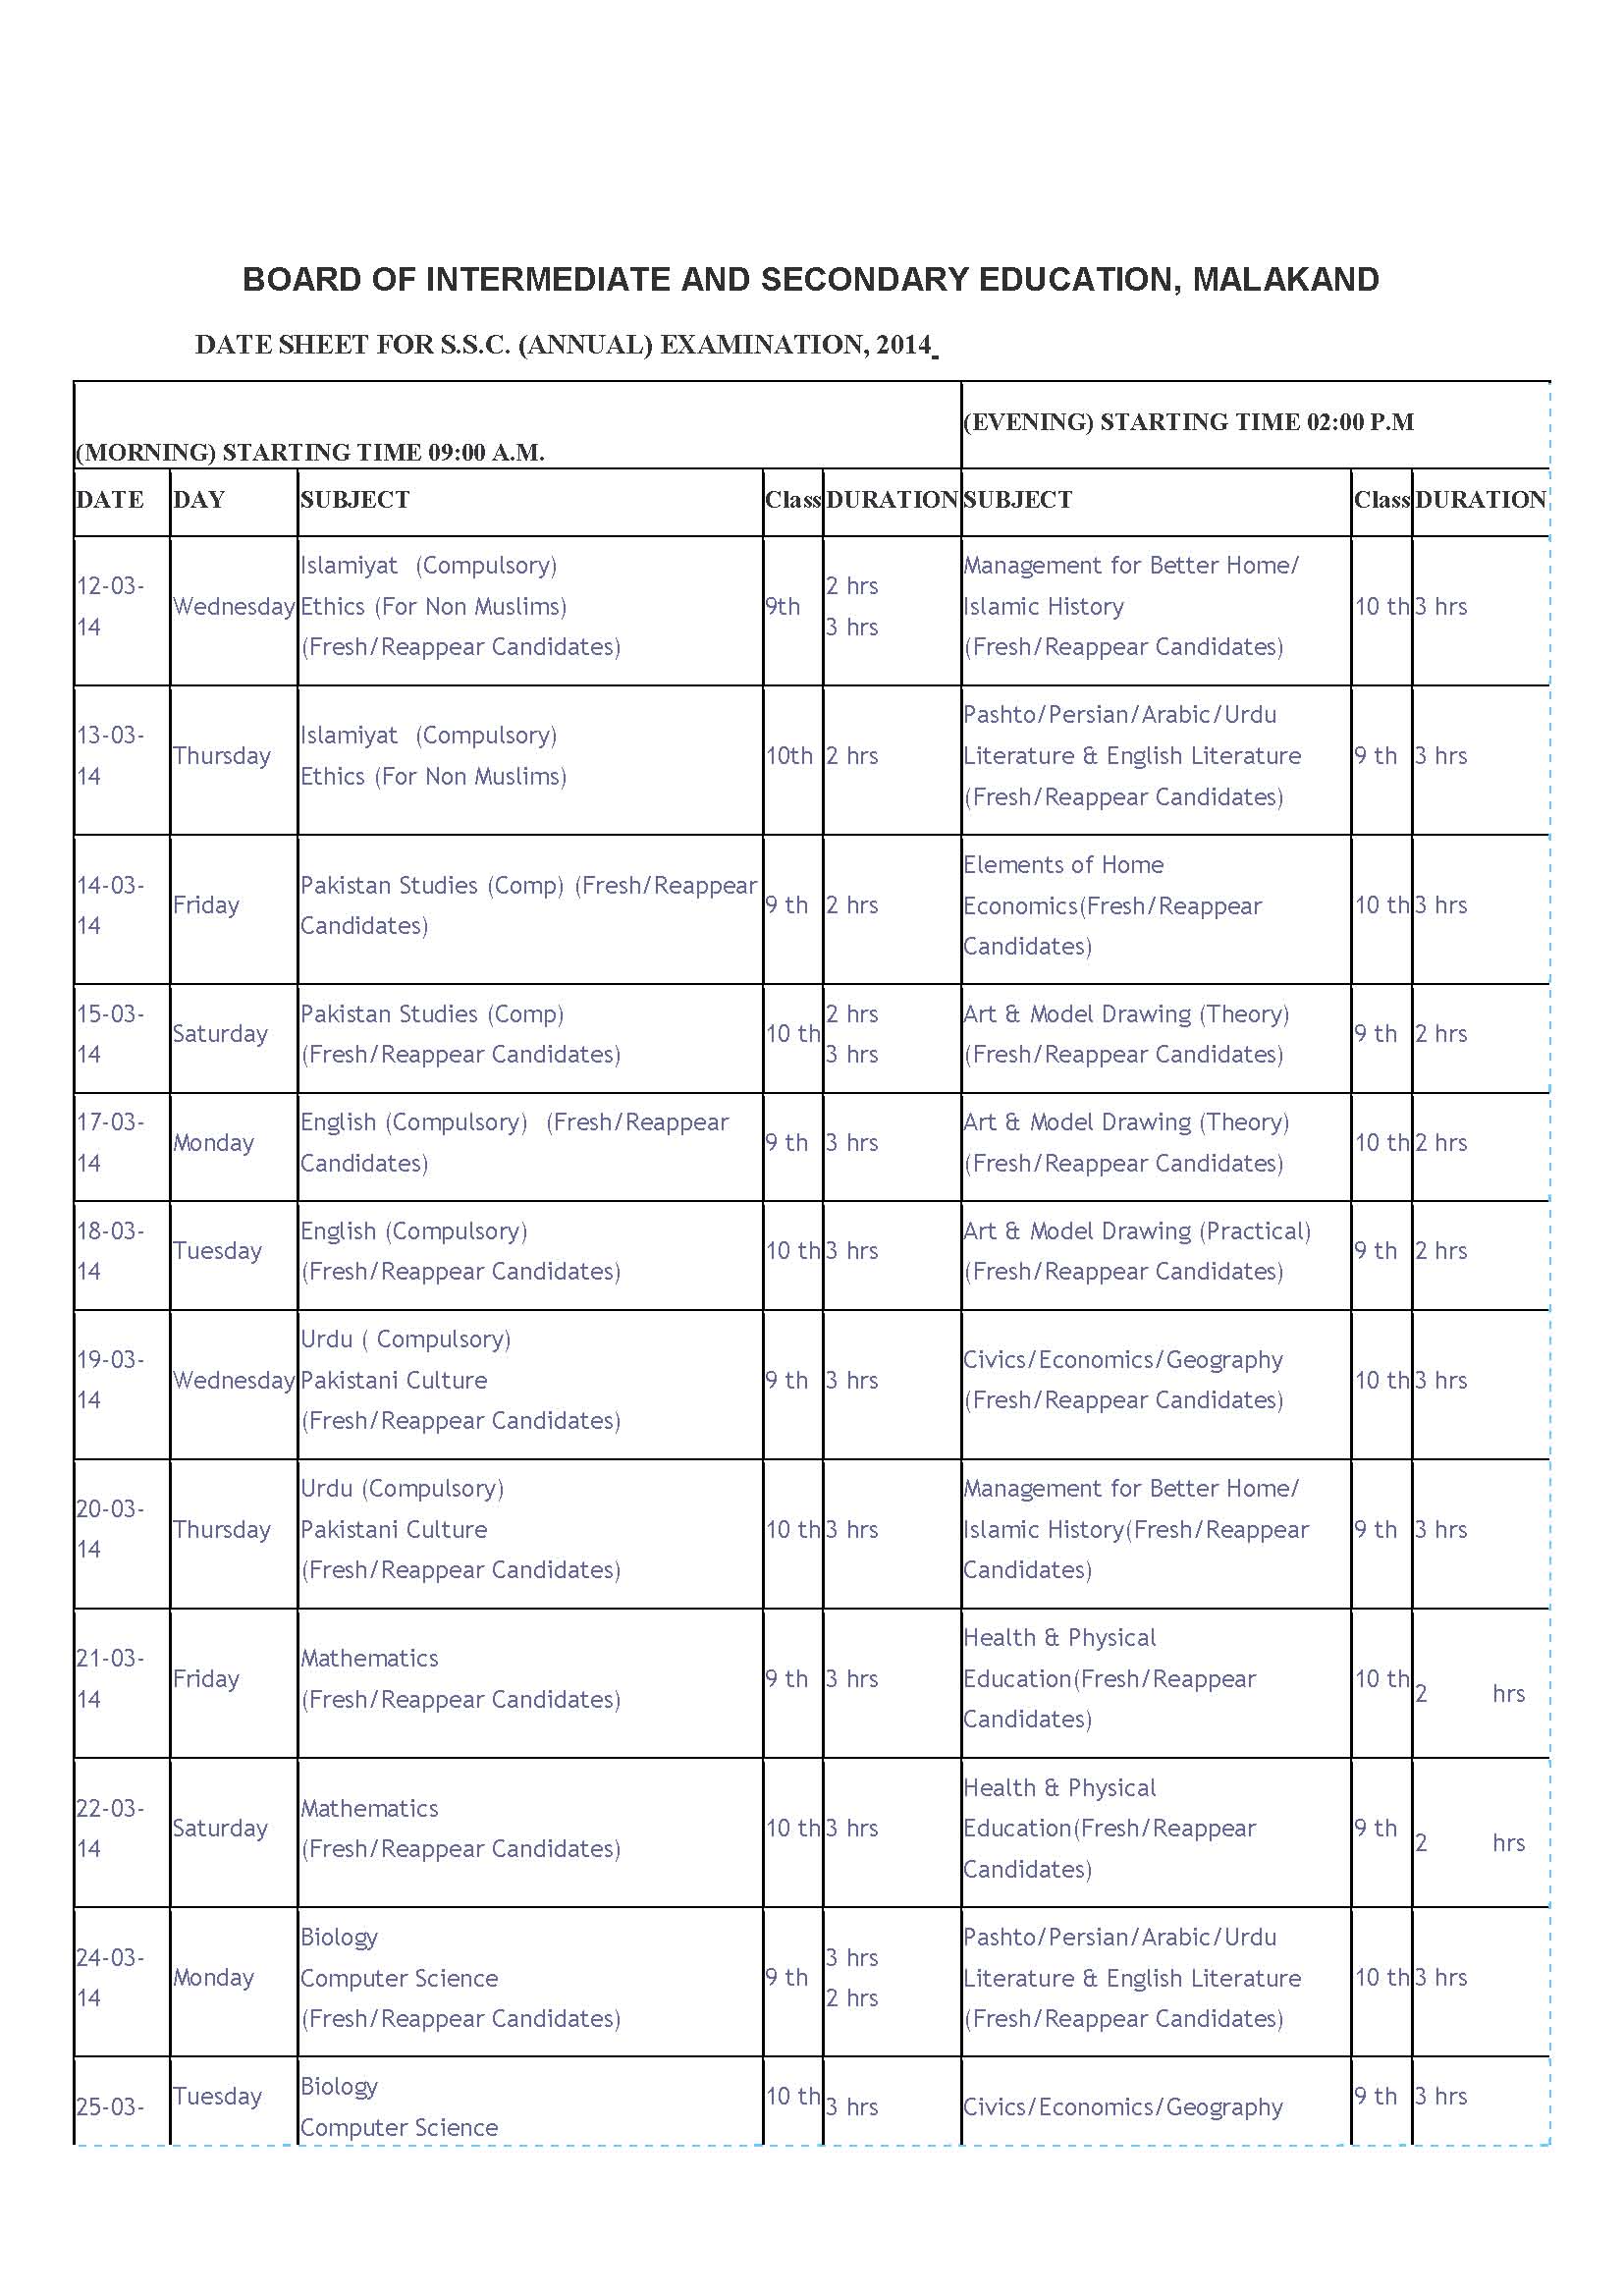 BISE Malakand announced date sheet for Matric Annual Examinations 2014